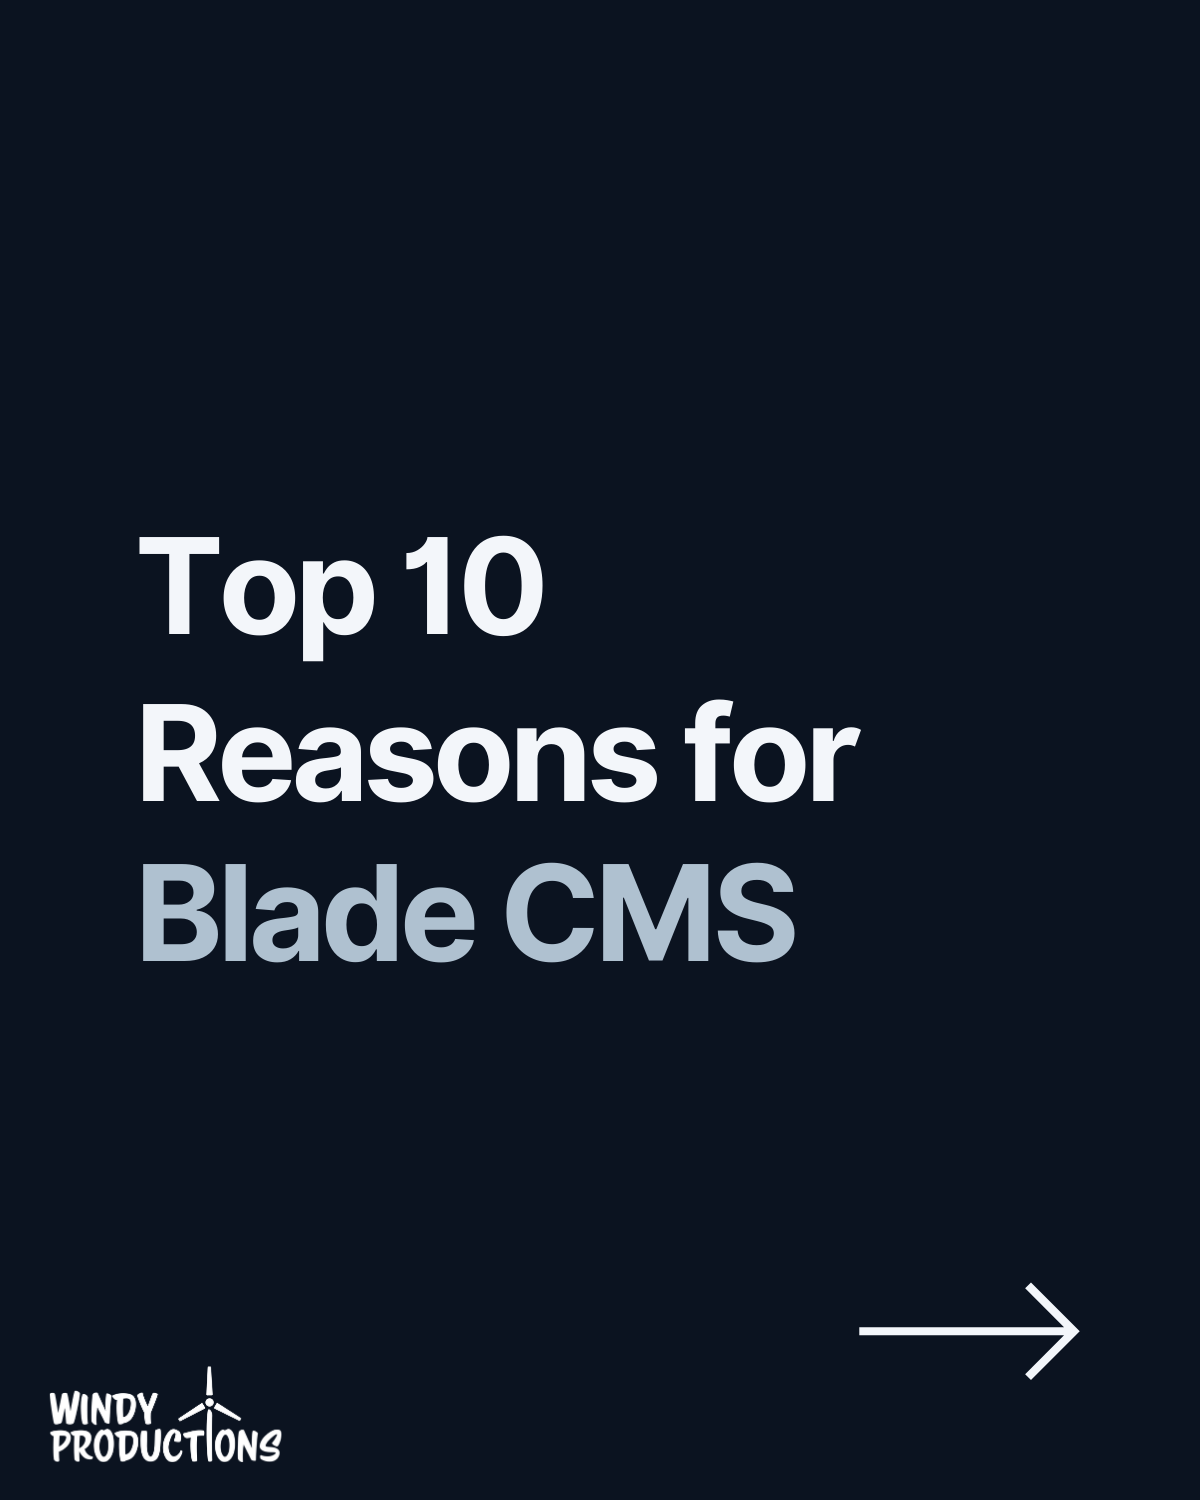 Top 10 Reasons for Blade CMS